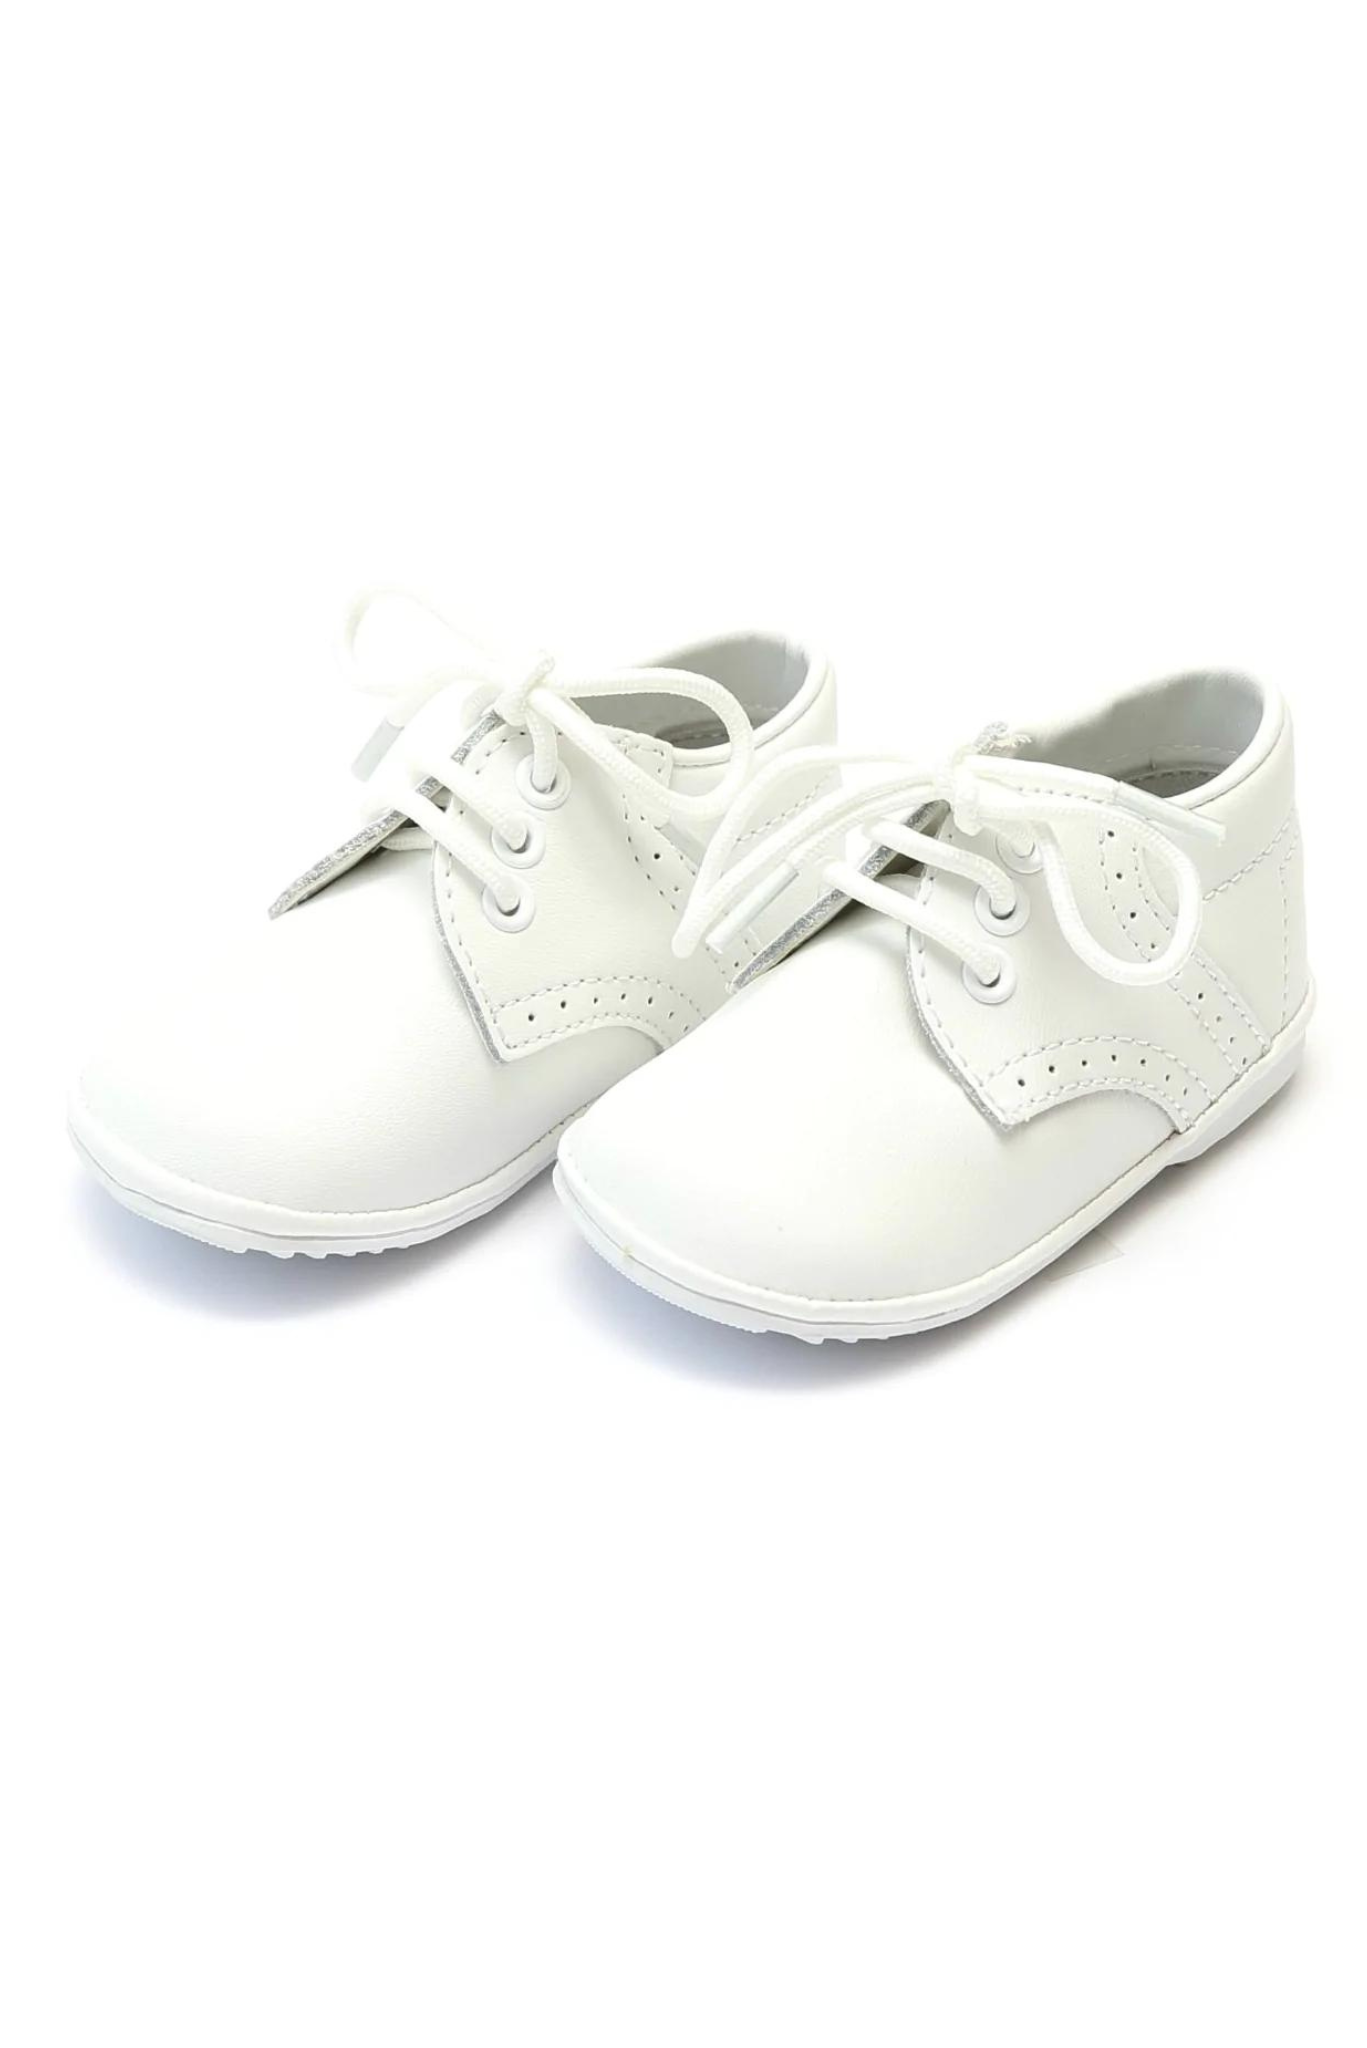 James Leather Lace Up Shoe (Baby)-White